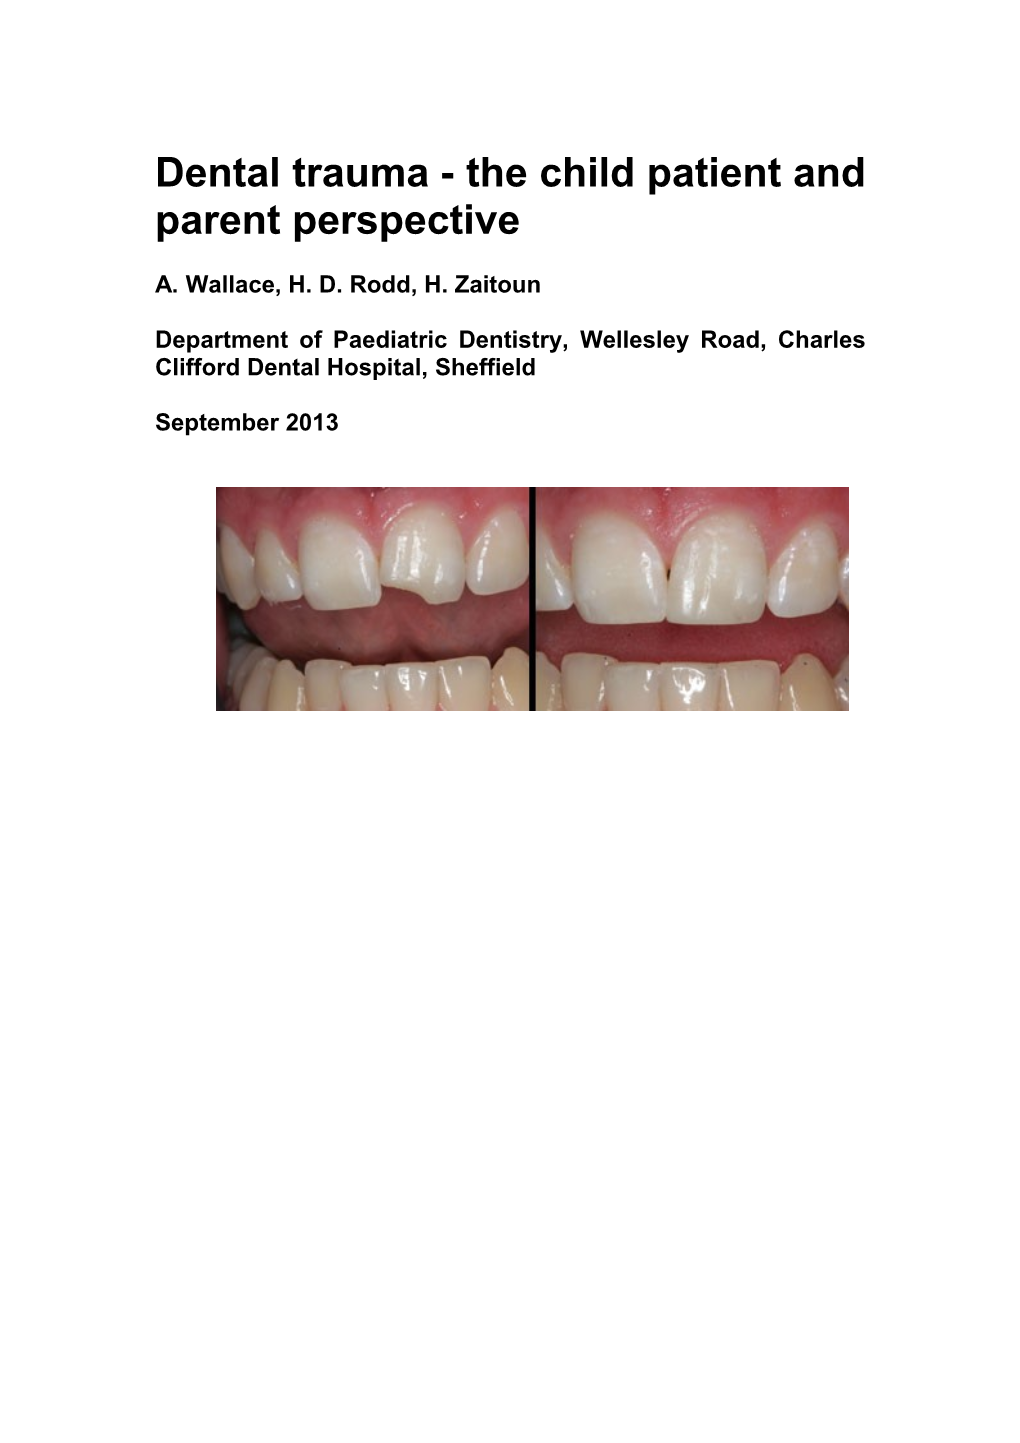 Children Commonly Traumatise Their Permanent Front (Incisor) Teeth, with Reported Injury